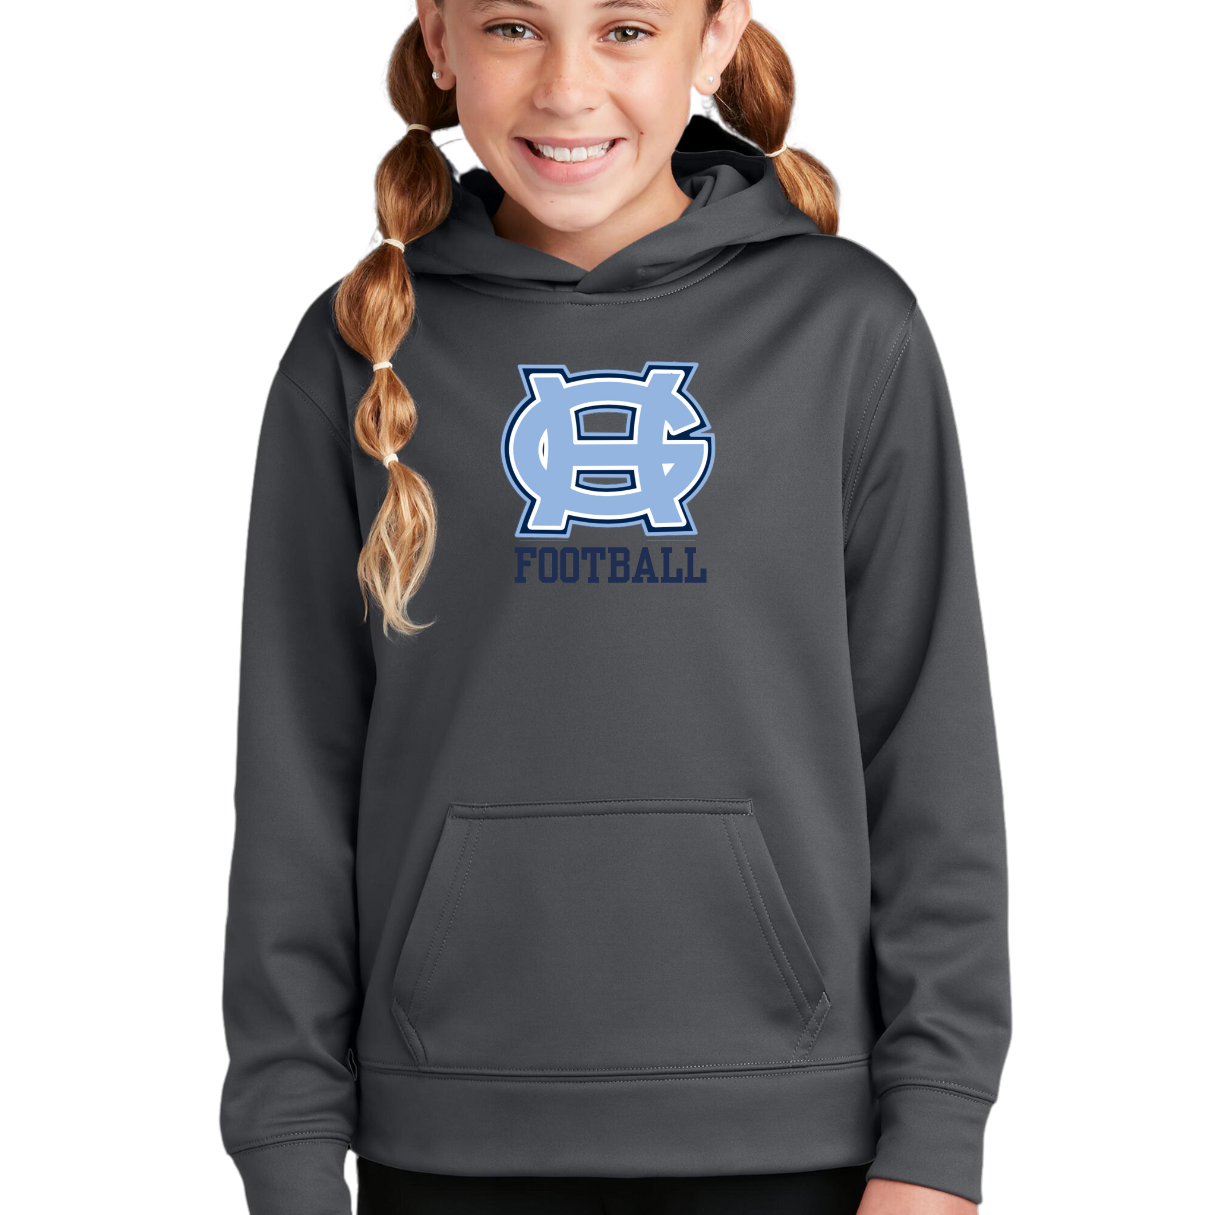 Classic GH Football Performance Hooded Sweatshirt - Adult and Youth